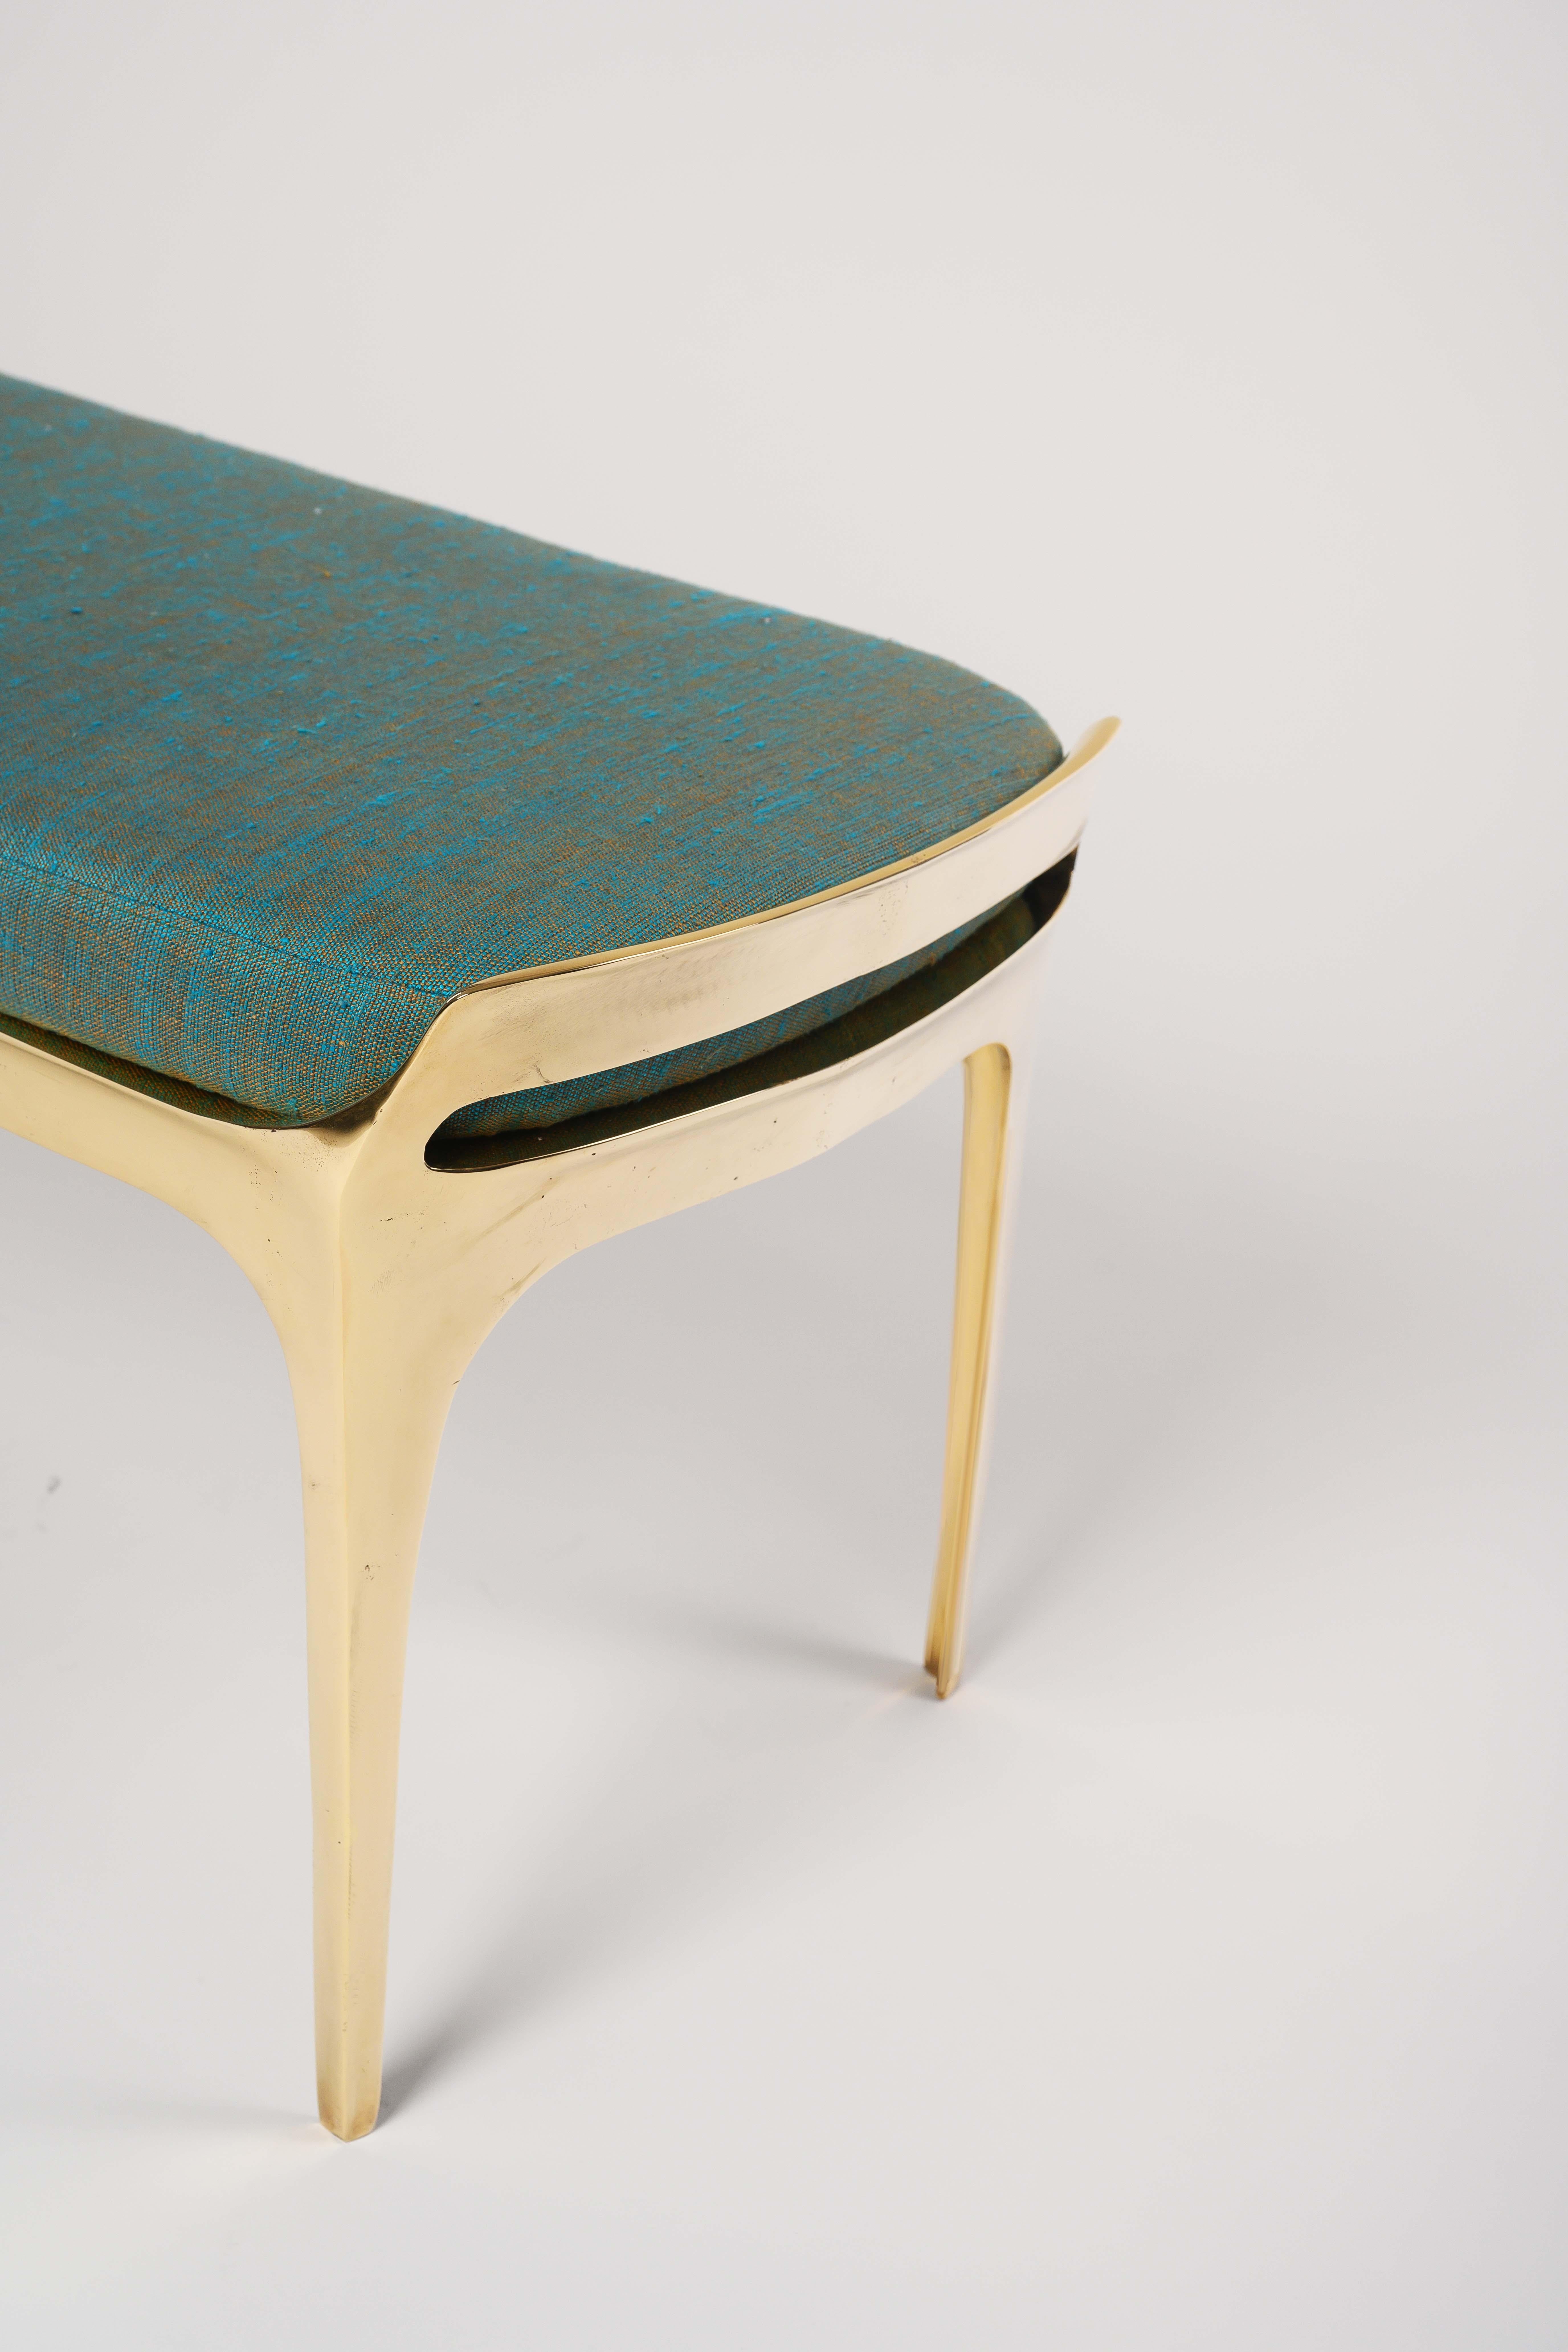 Modern Bruda Bench with Gold Bronze Frame and Blue Seat by Elan Atelier (IN STOCK) For Sale